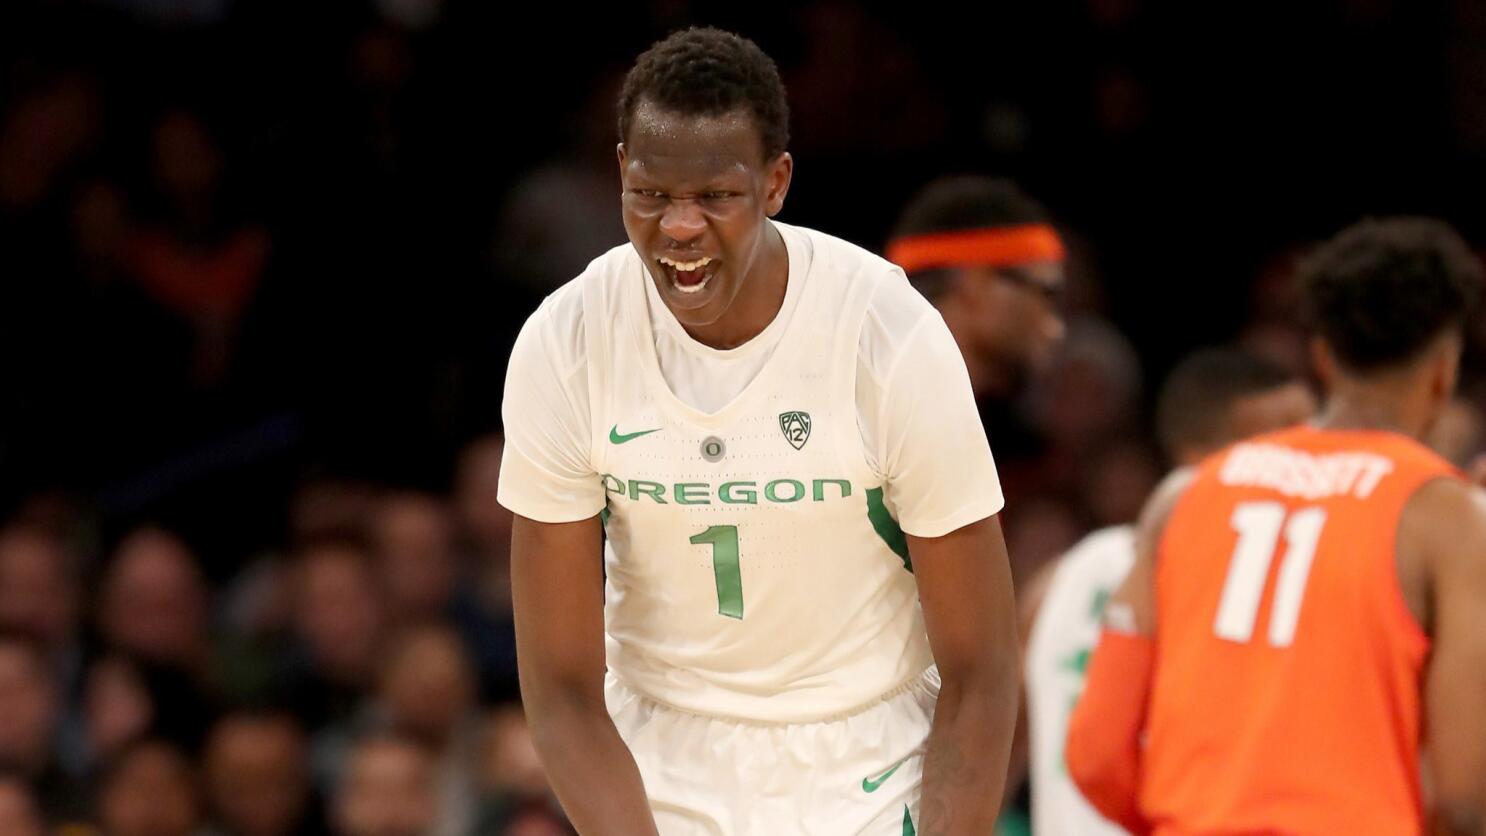 Bol Bol Could Be a Whole New Kind of Basketball Player - The Ringer